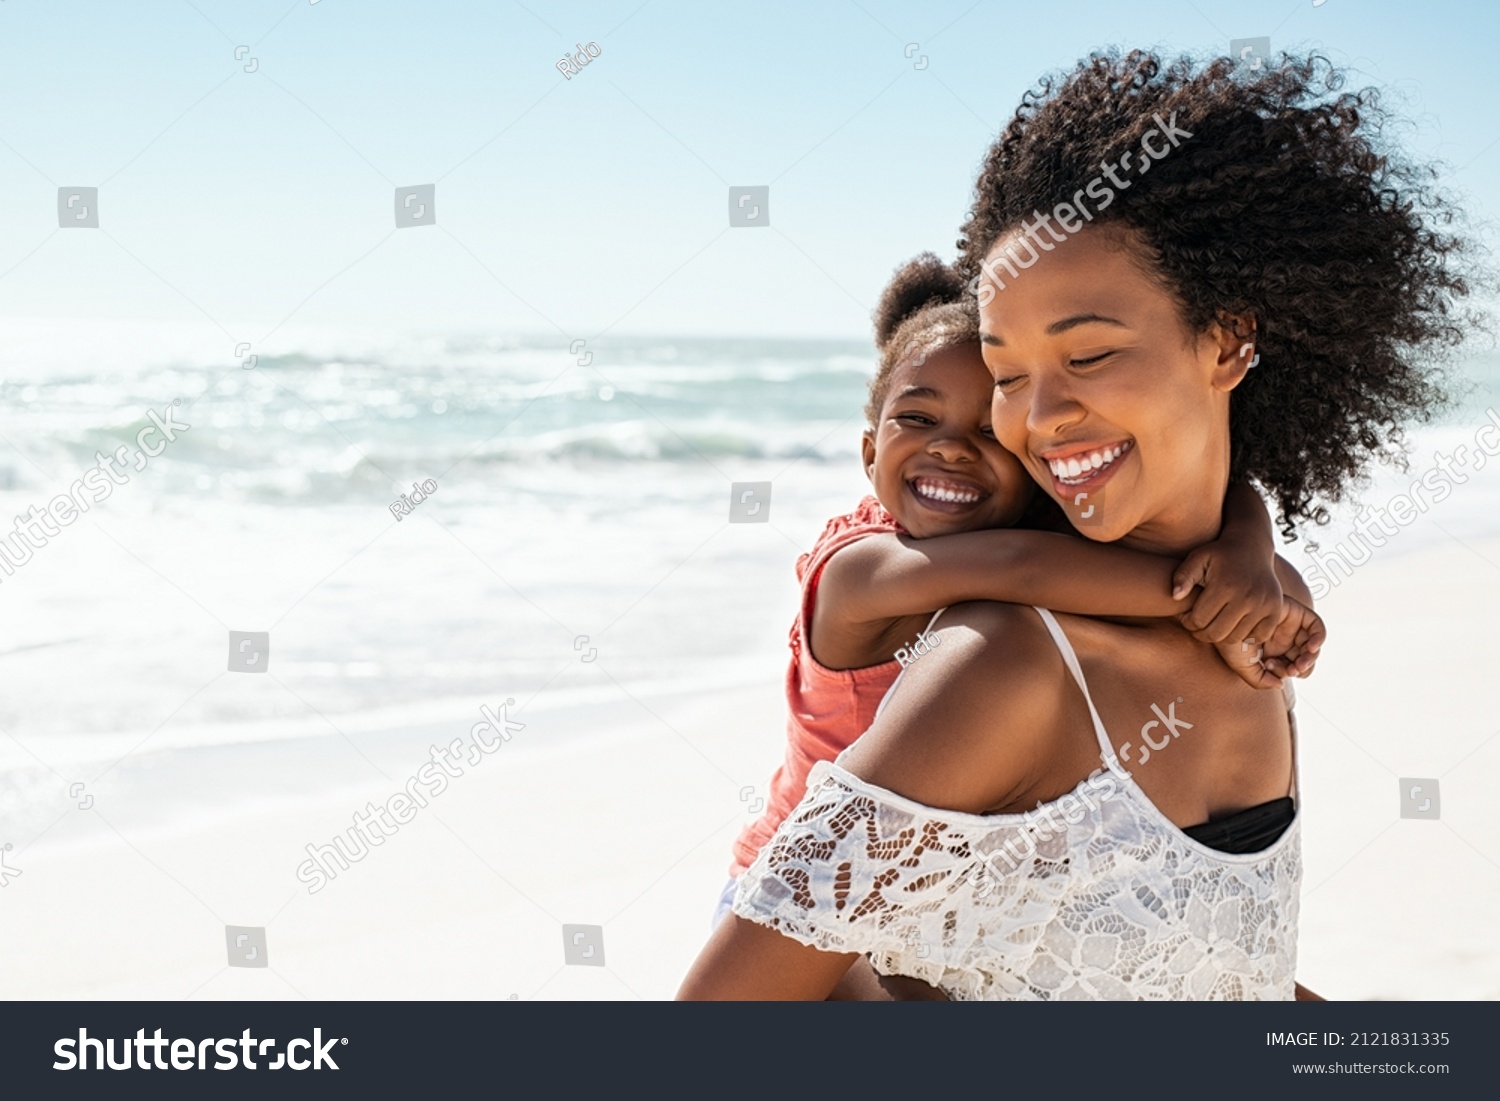 Smiling young black mother and beautiful daughter having fun on the beach with copy space. Portrait of happy sister giving a piggyback ride to cute little girl at seaside. Lovely kid embracing her mom #2121831335